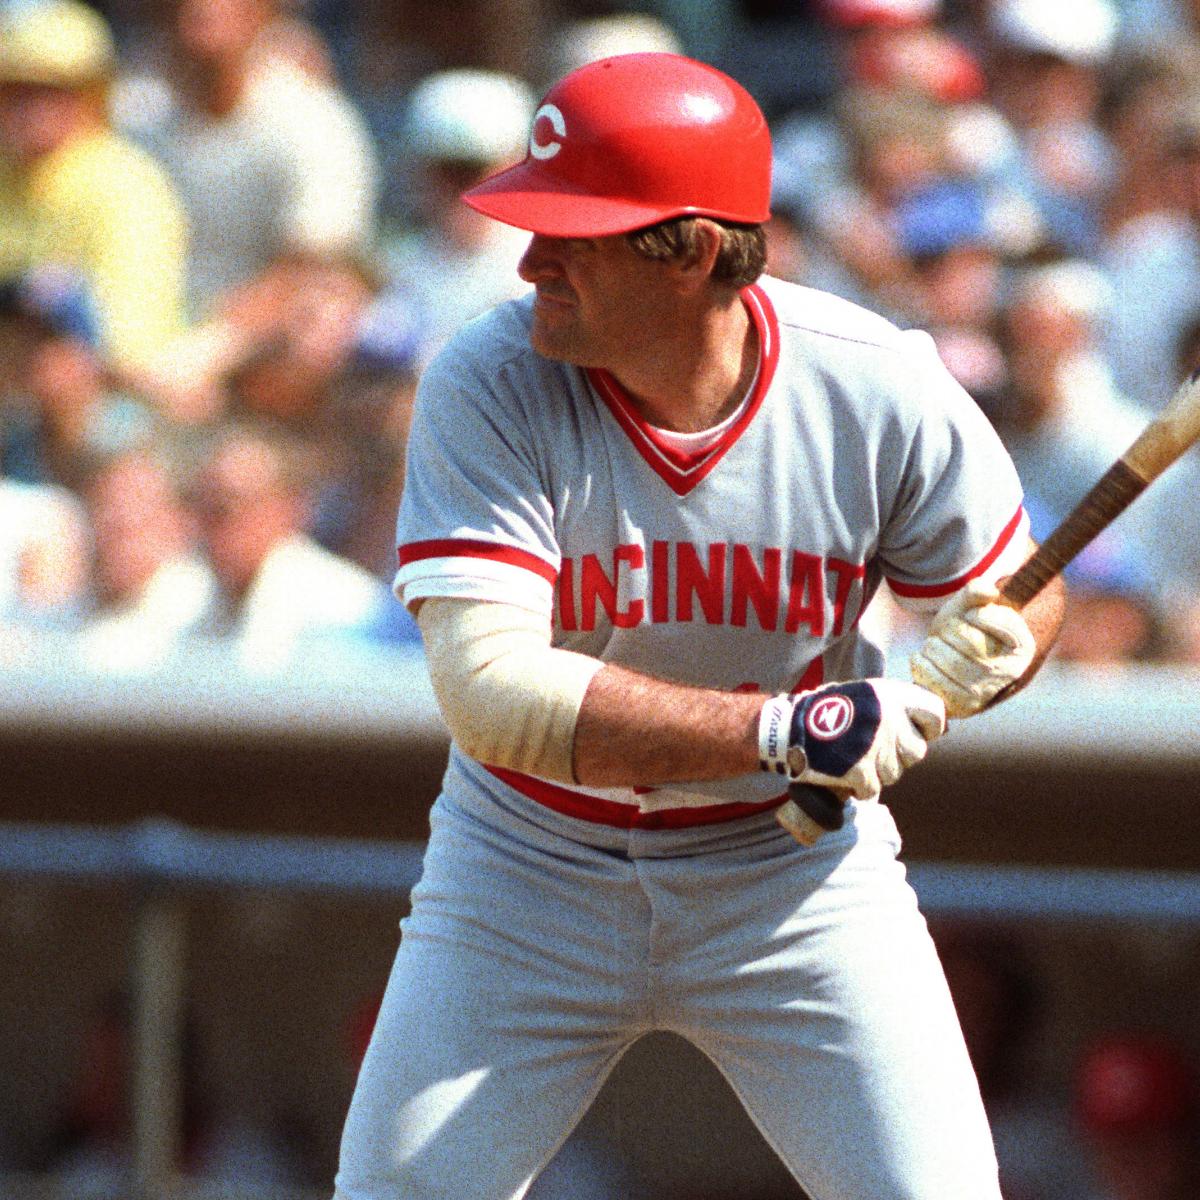 Pete Rose had bats corked in '84, former Expos groundskeeper says